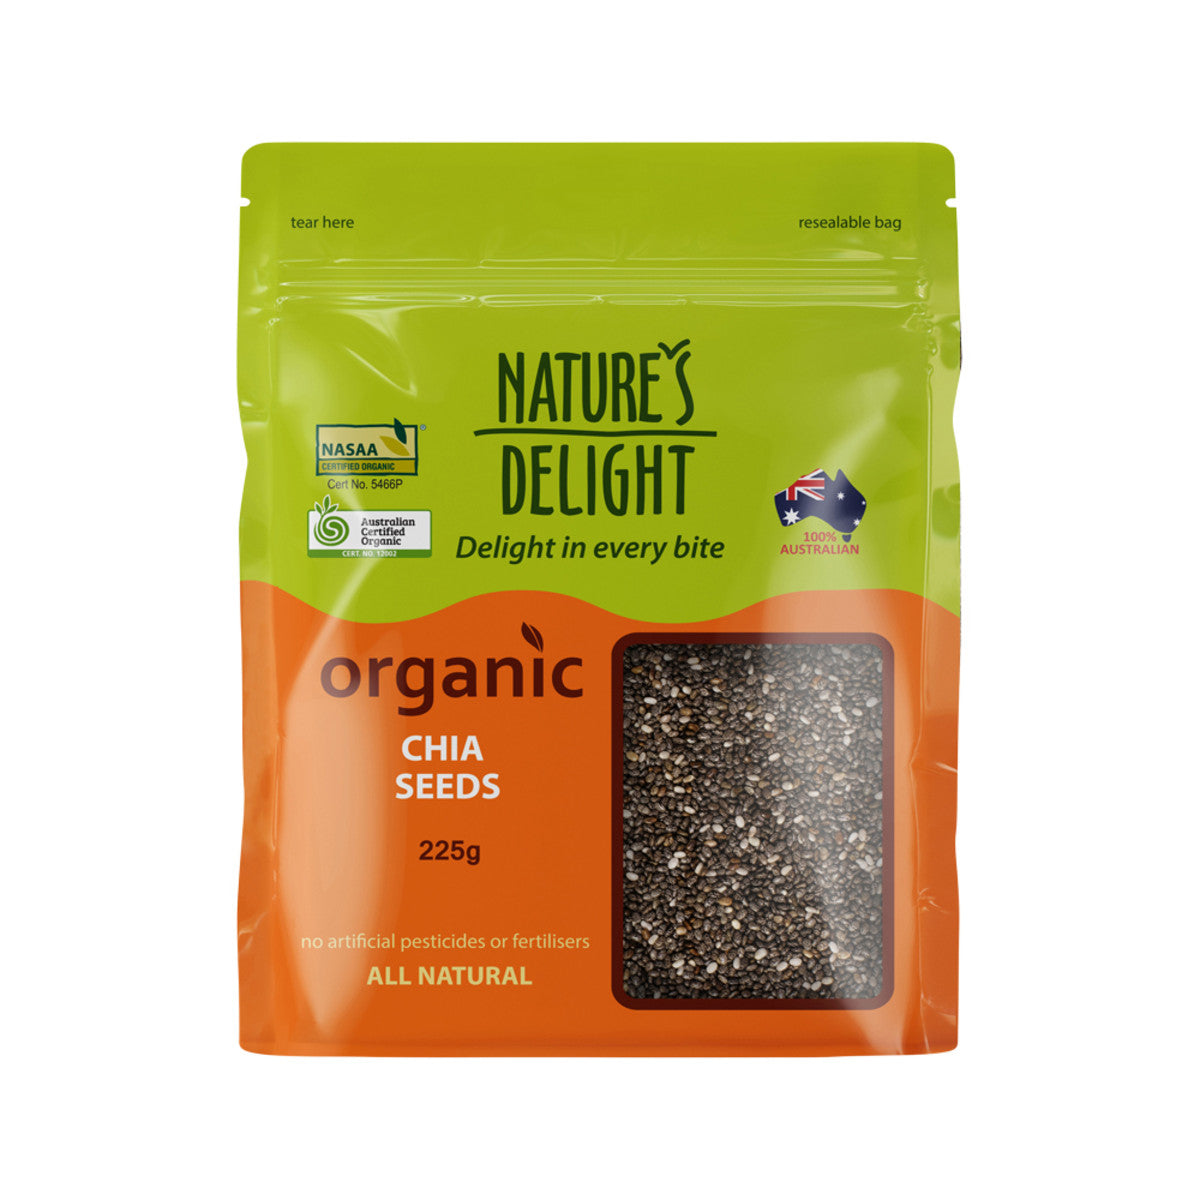 Natures Delight Organic Chia Seeds 225g